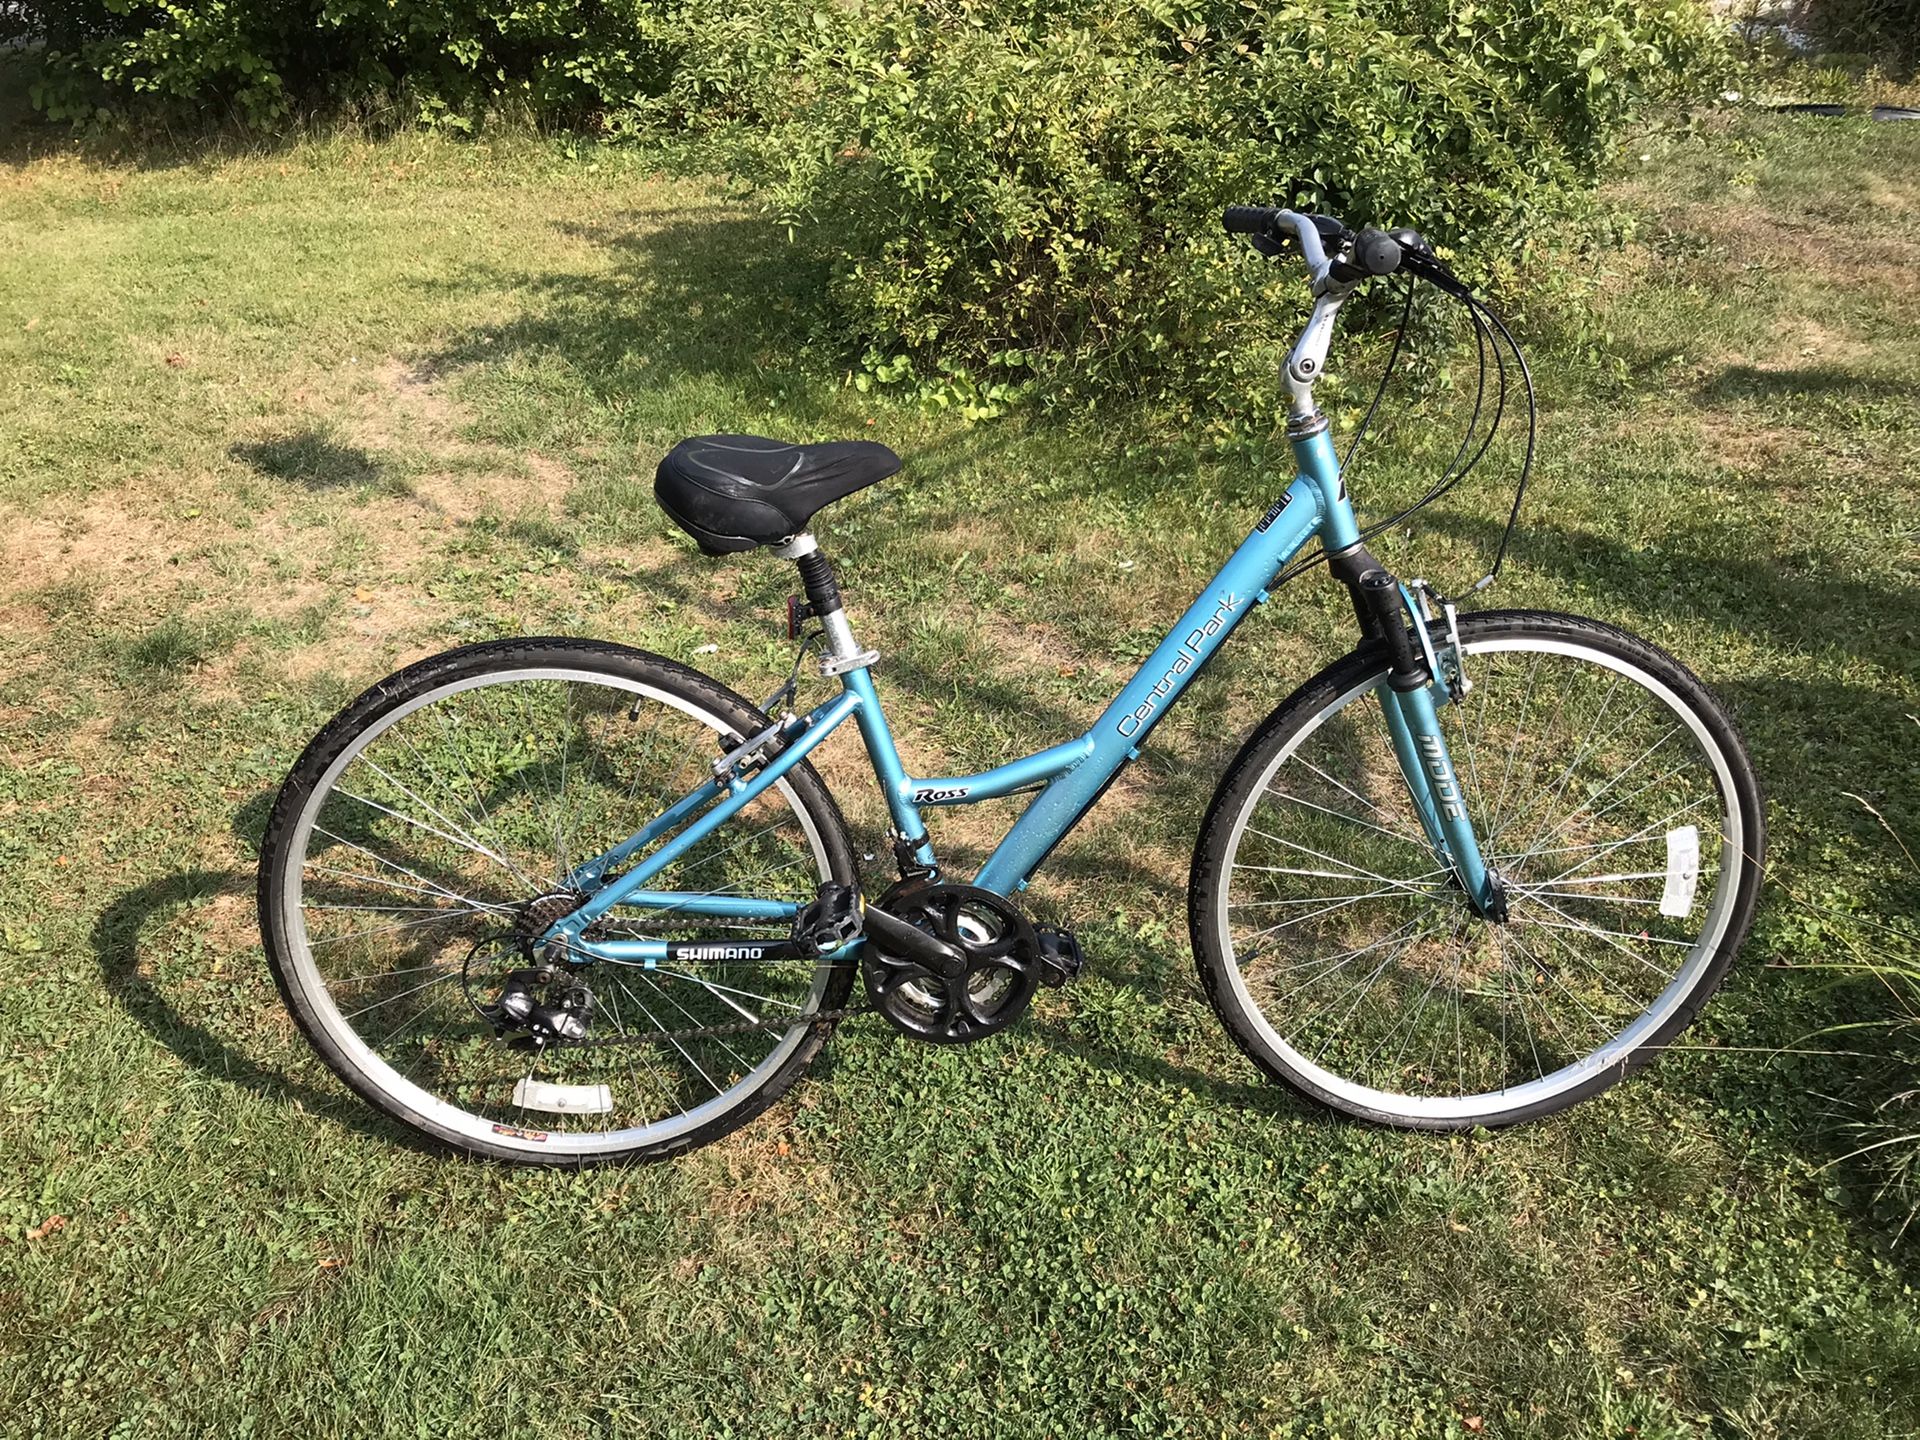 29er cruiser hybrid. with front and rear suspension